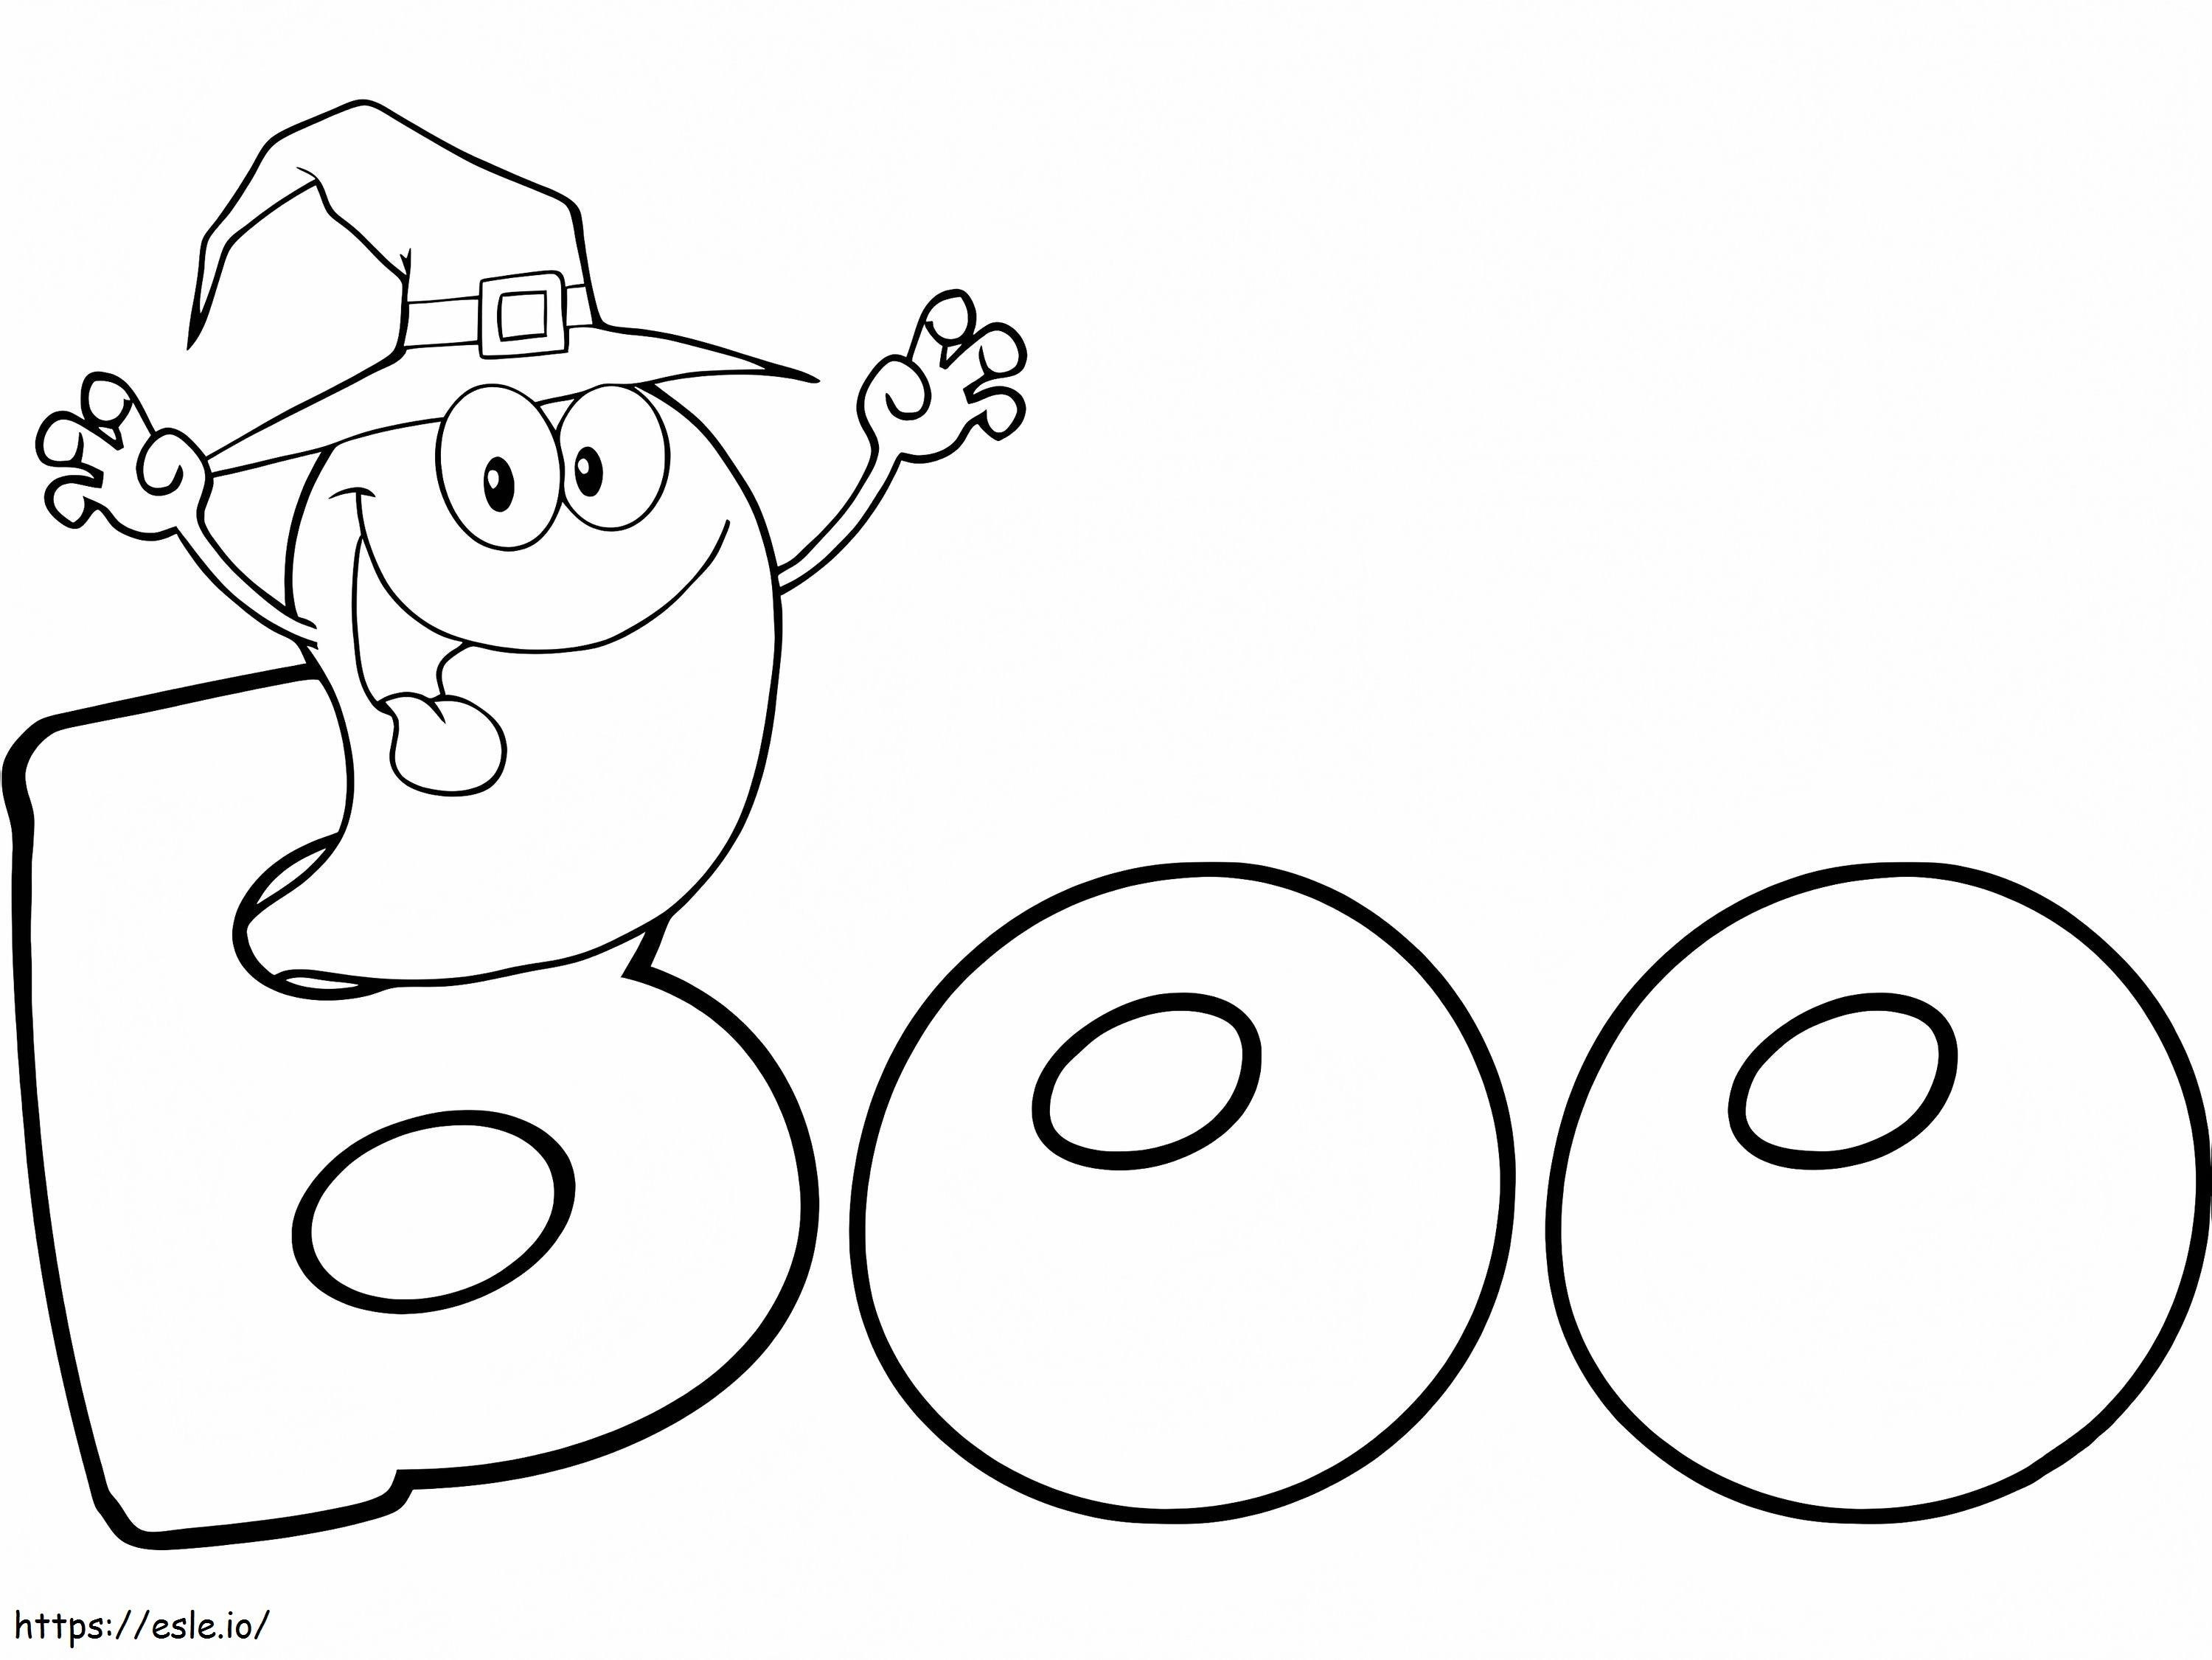 boo-monsters-inc-coloring-page-clip-art-library